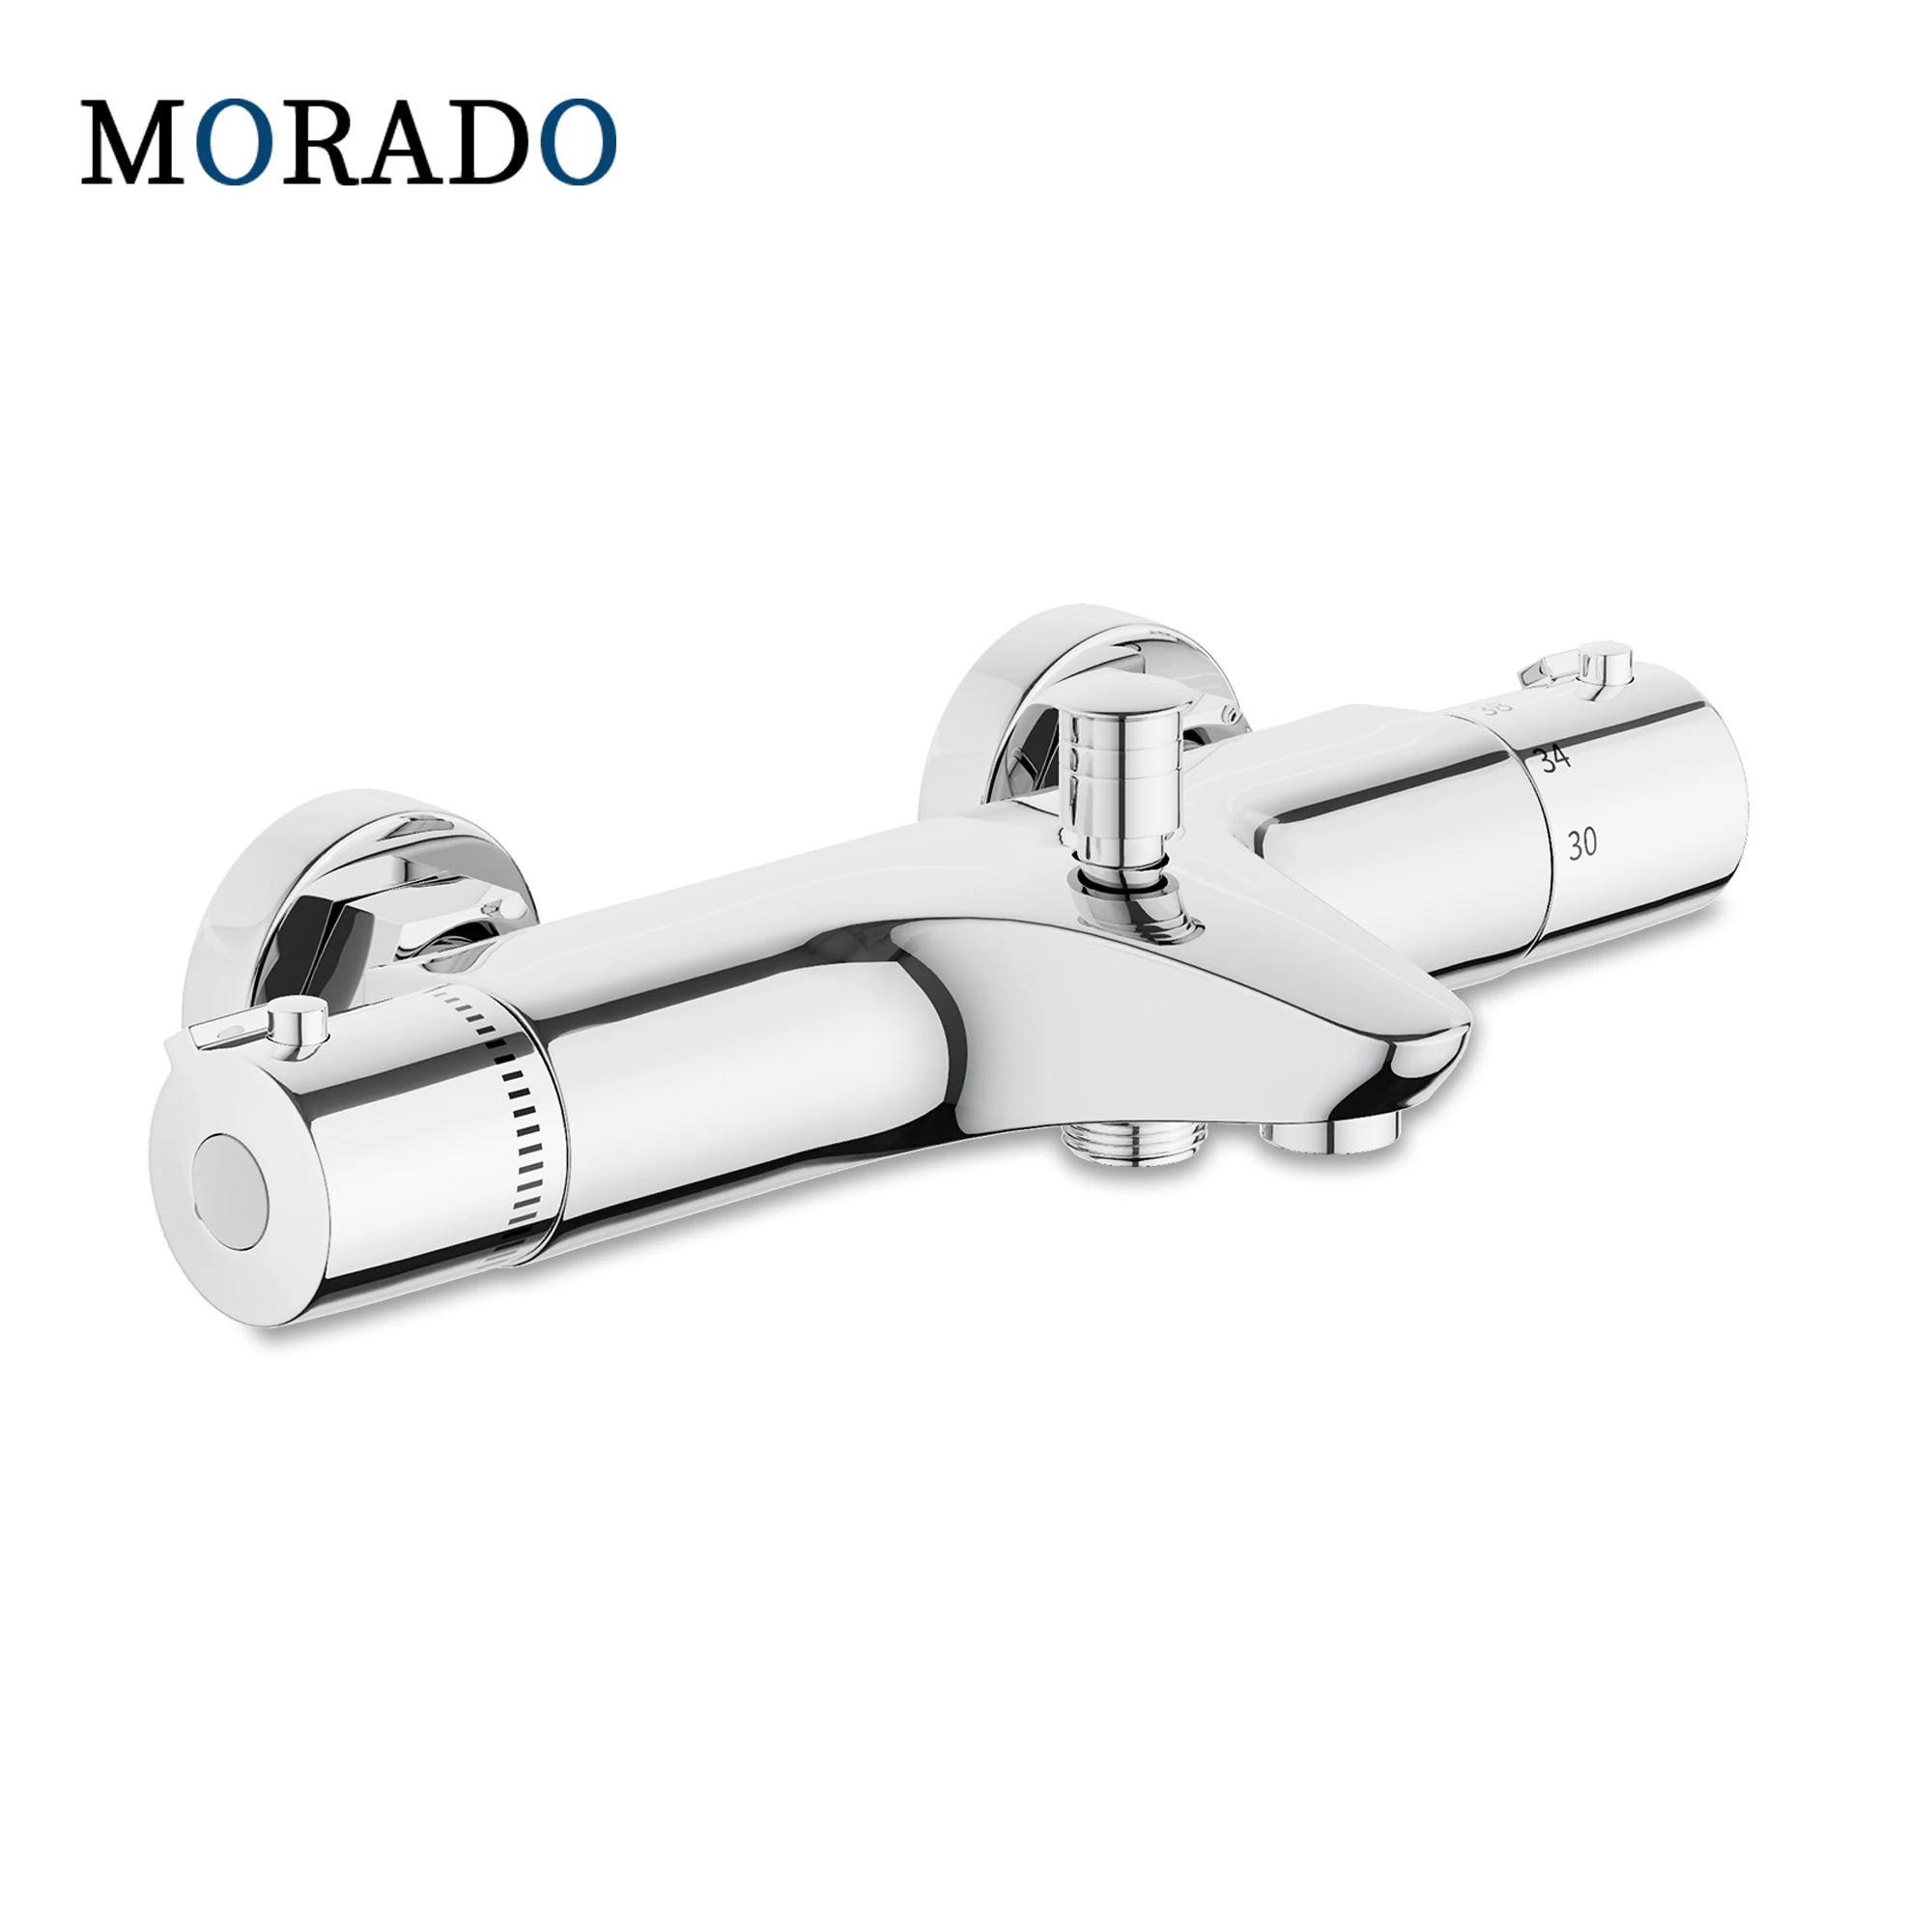 

MORADO Thermostatic Shower Bath Mixer Wall Mounted Bath Tap Exposed Shower Faucet Chrome Brass Bathroom Mixing Valve Basin Sink